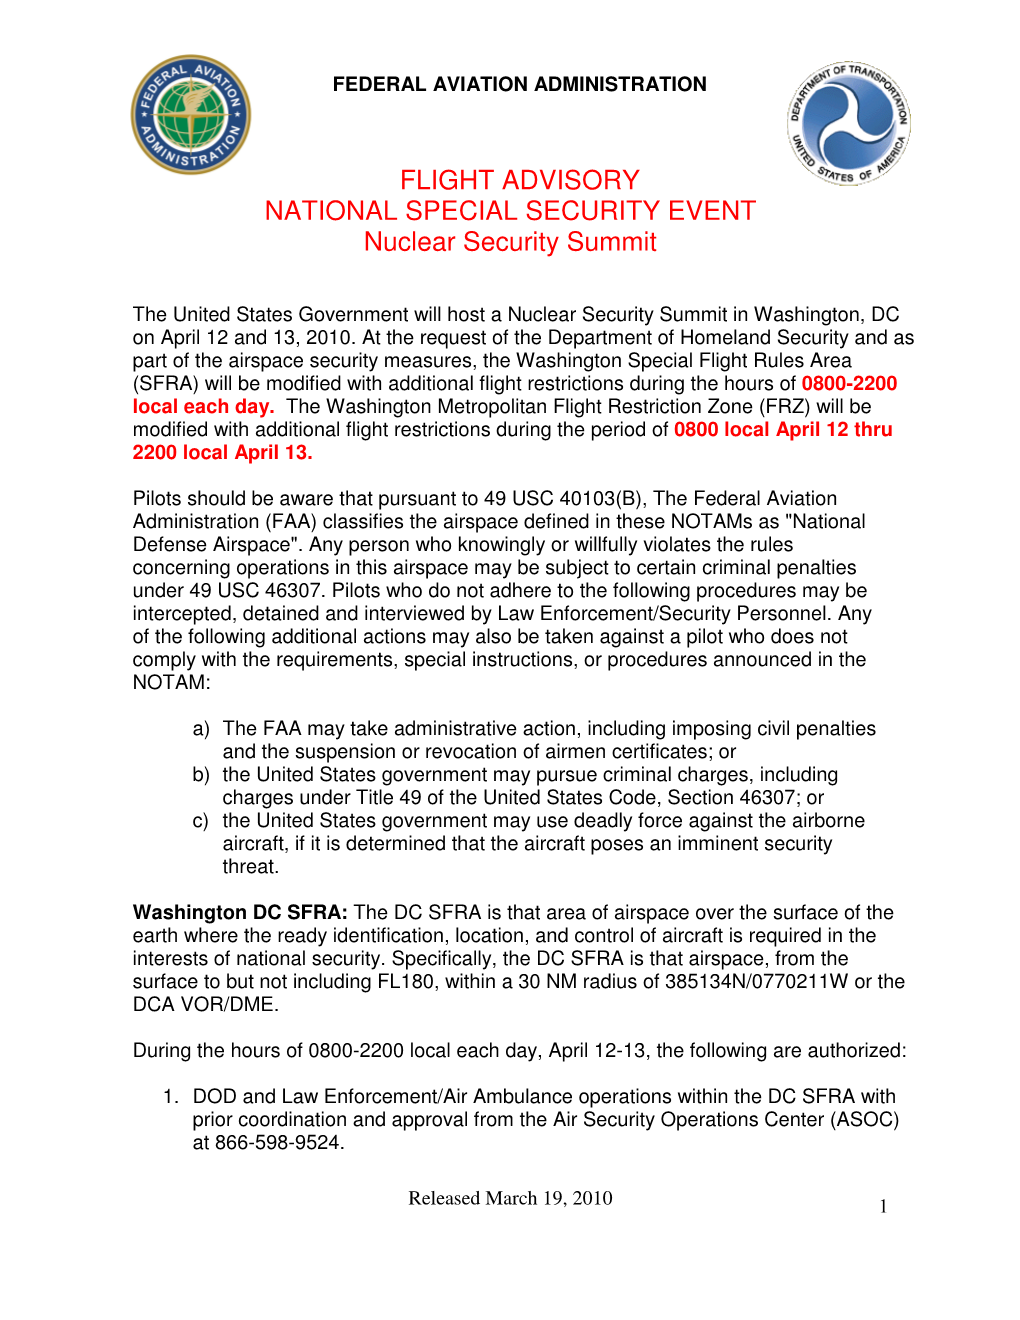 FLIGHT ADVISORY NATIONAL SPECIAL SECURITY EVENT Nuclear Security Summit